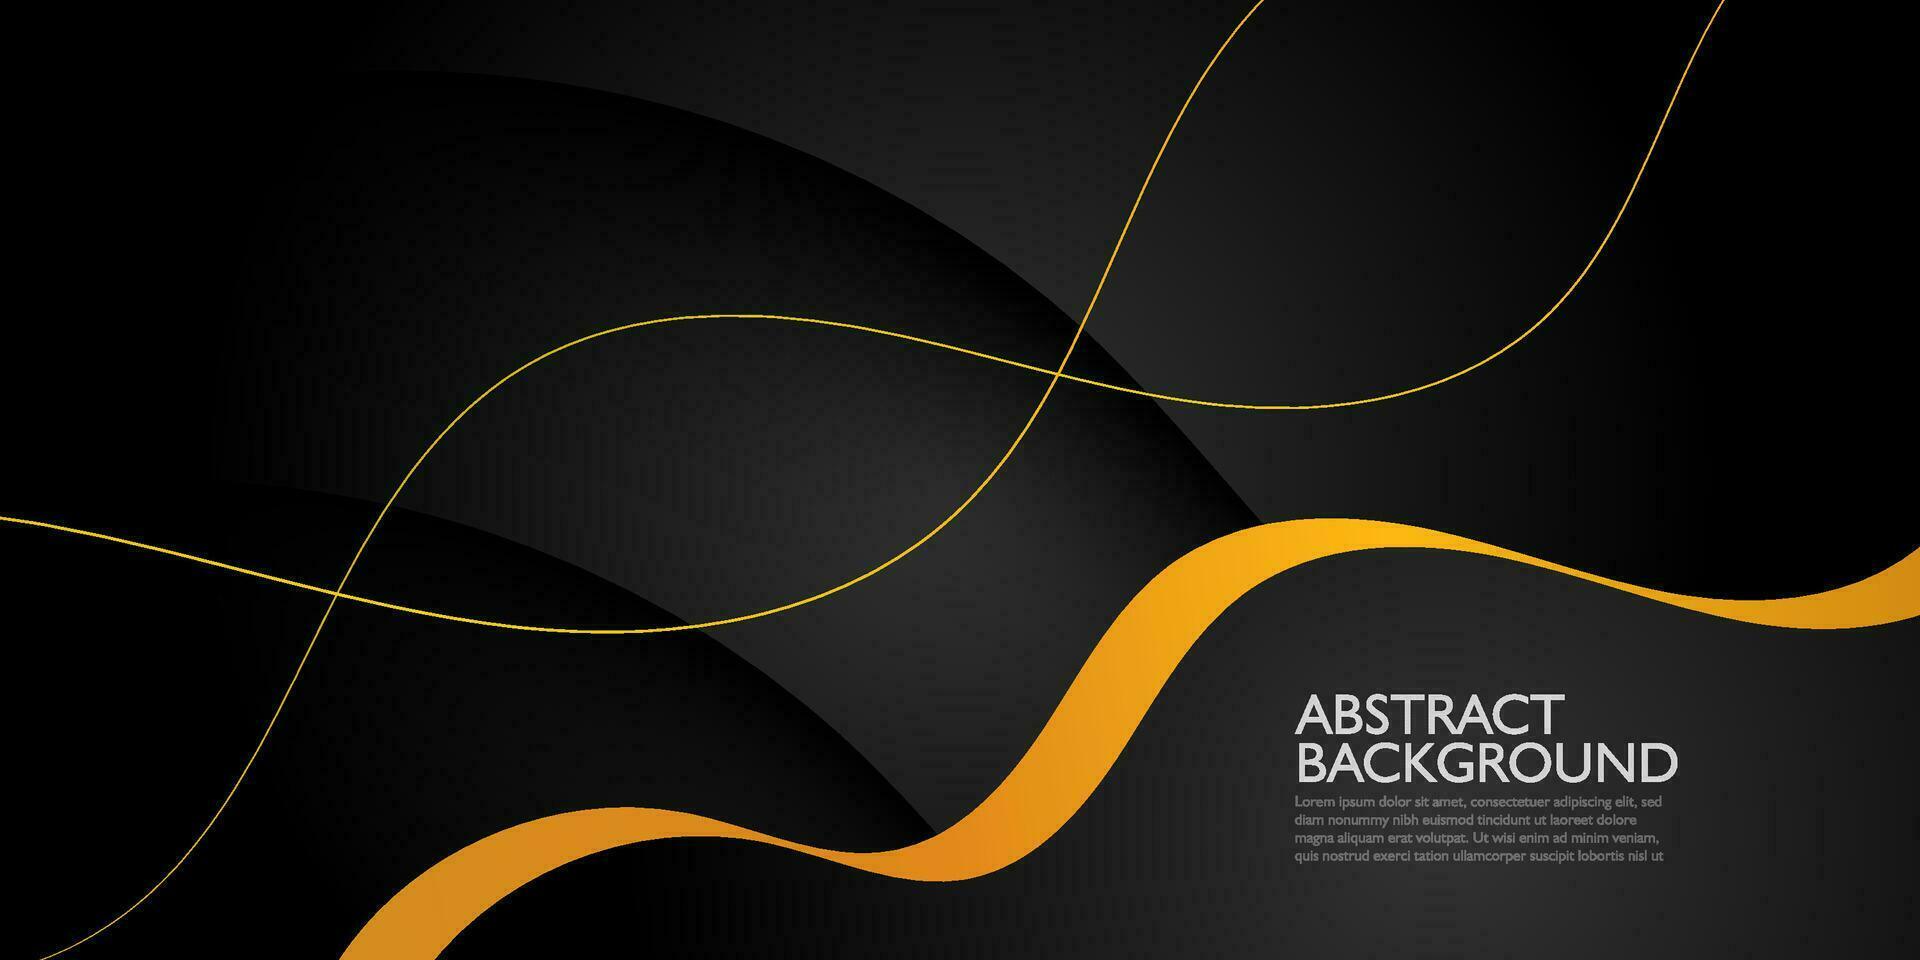 Abstract wave dark luxury background template vector with shadow and gold lines. Futuristic background with gold pattern design. Eps10 vector